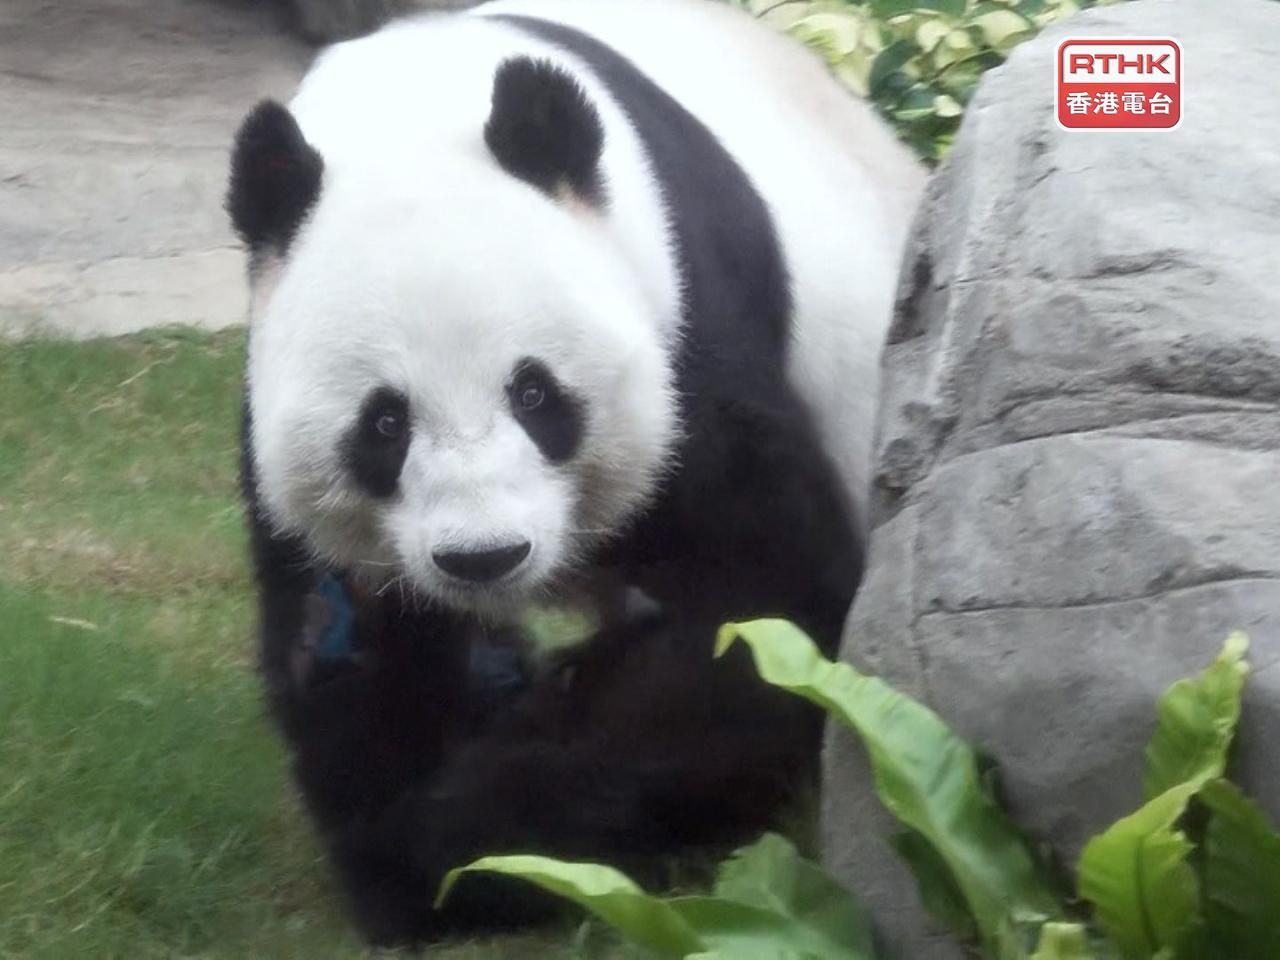 Officials to go to Sichuan to discuss panda delivery